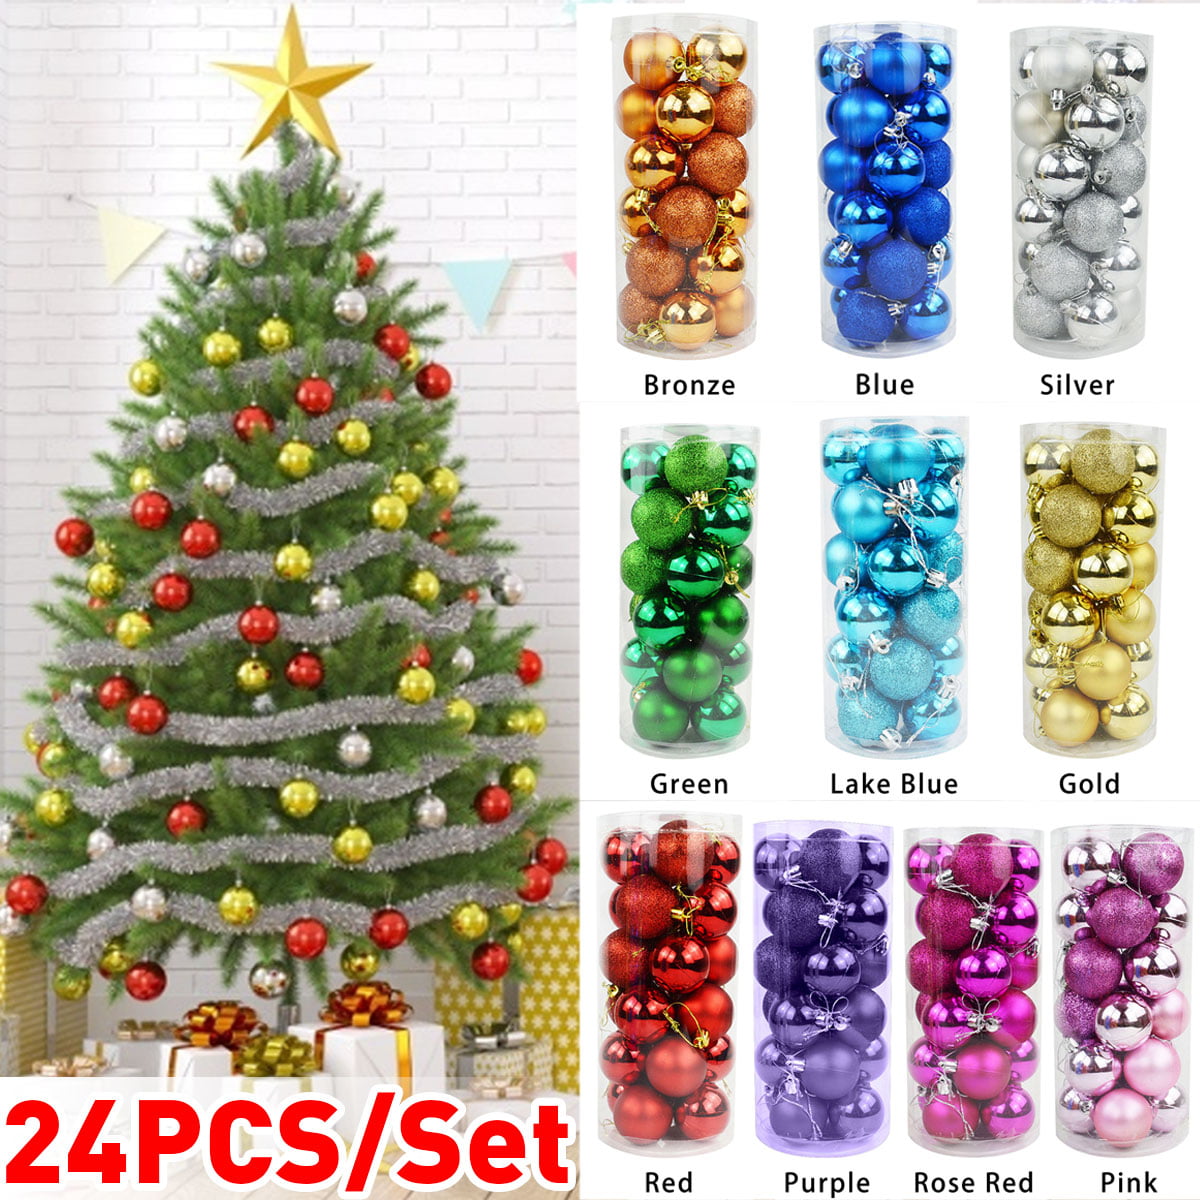 14 Colors 24Pcs Christmas Balls Ornaments Small Shatterproof Christmas Tree Decorations Hanging Balls for Holiday Wedding Party Decoration